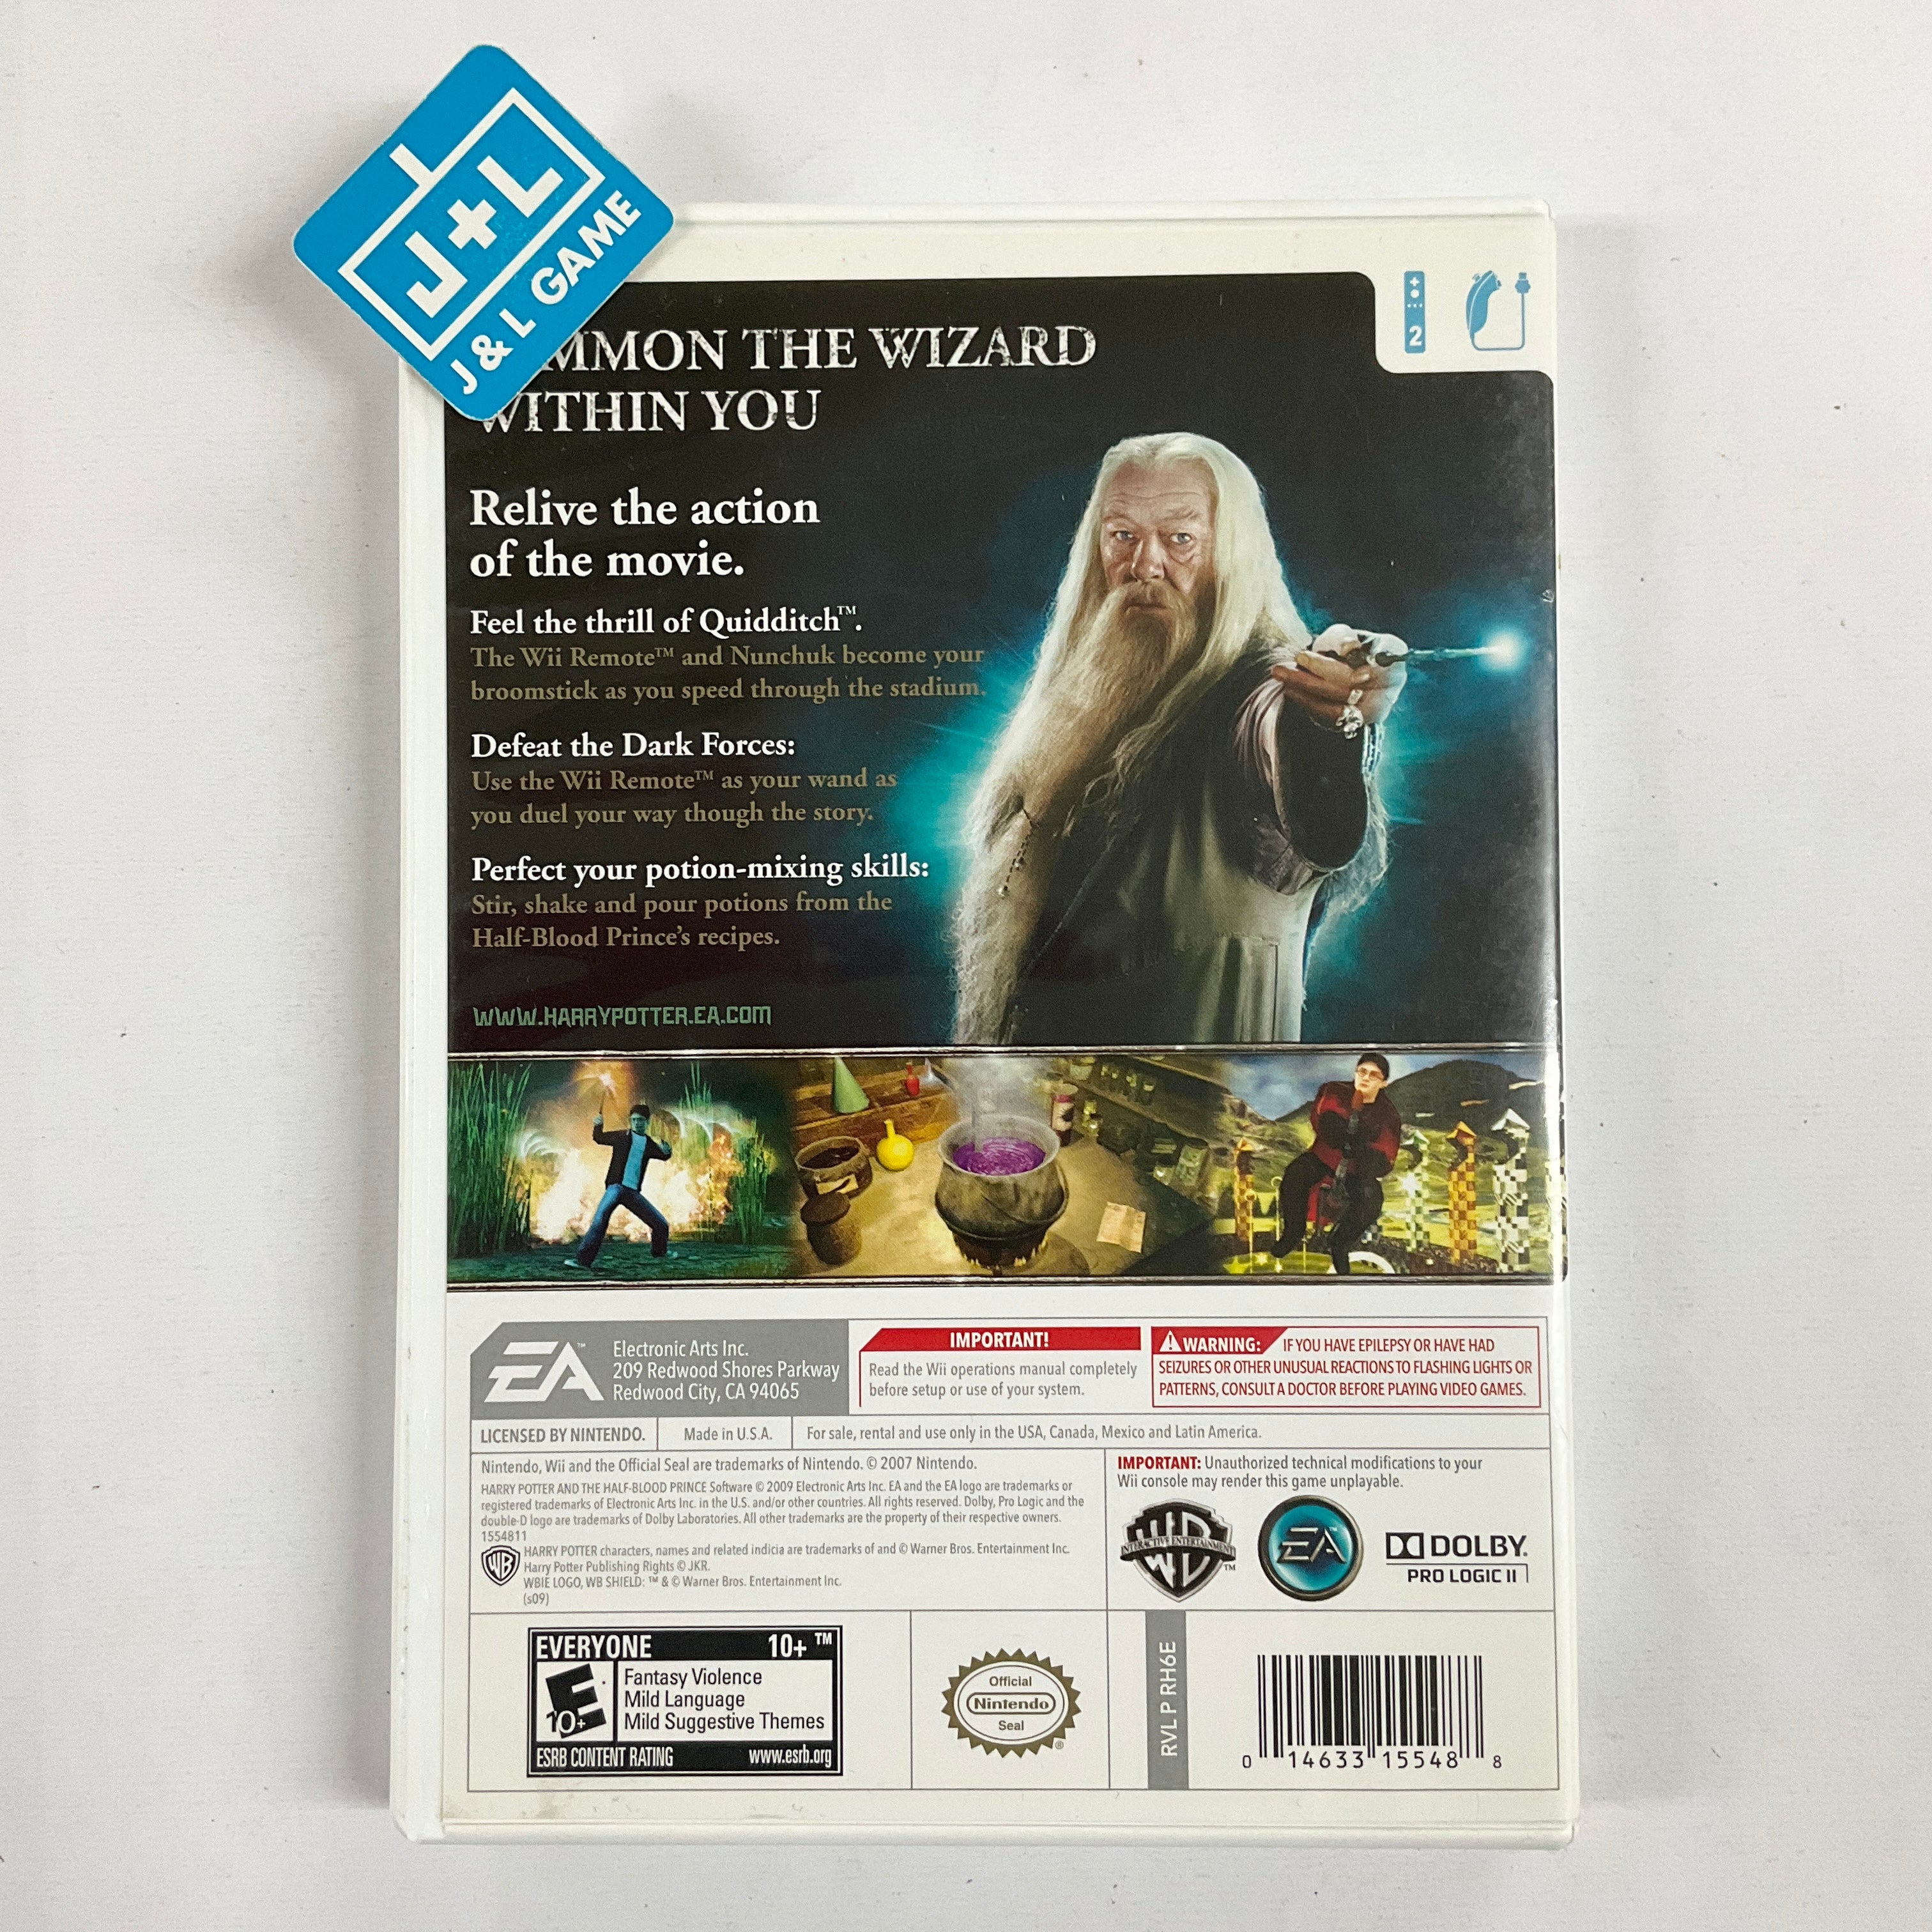 Harry Potter and the Half Blood Prince - Nintendo Wii [Pre-Owned] Video Games Electronic Arts   